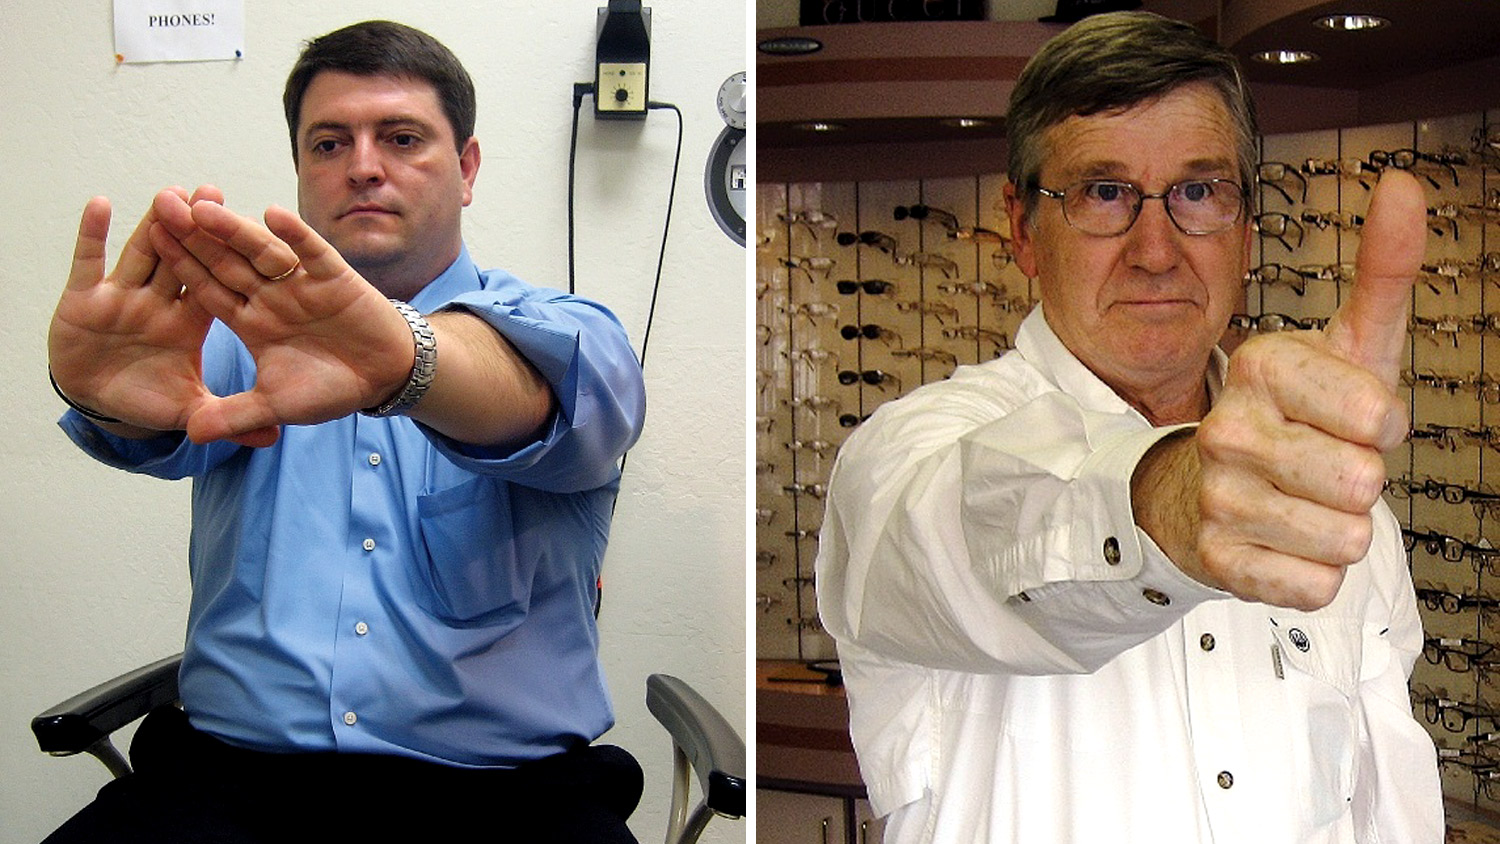 Examples of the old and new eye dominance tests